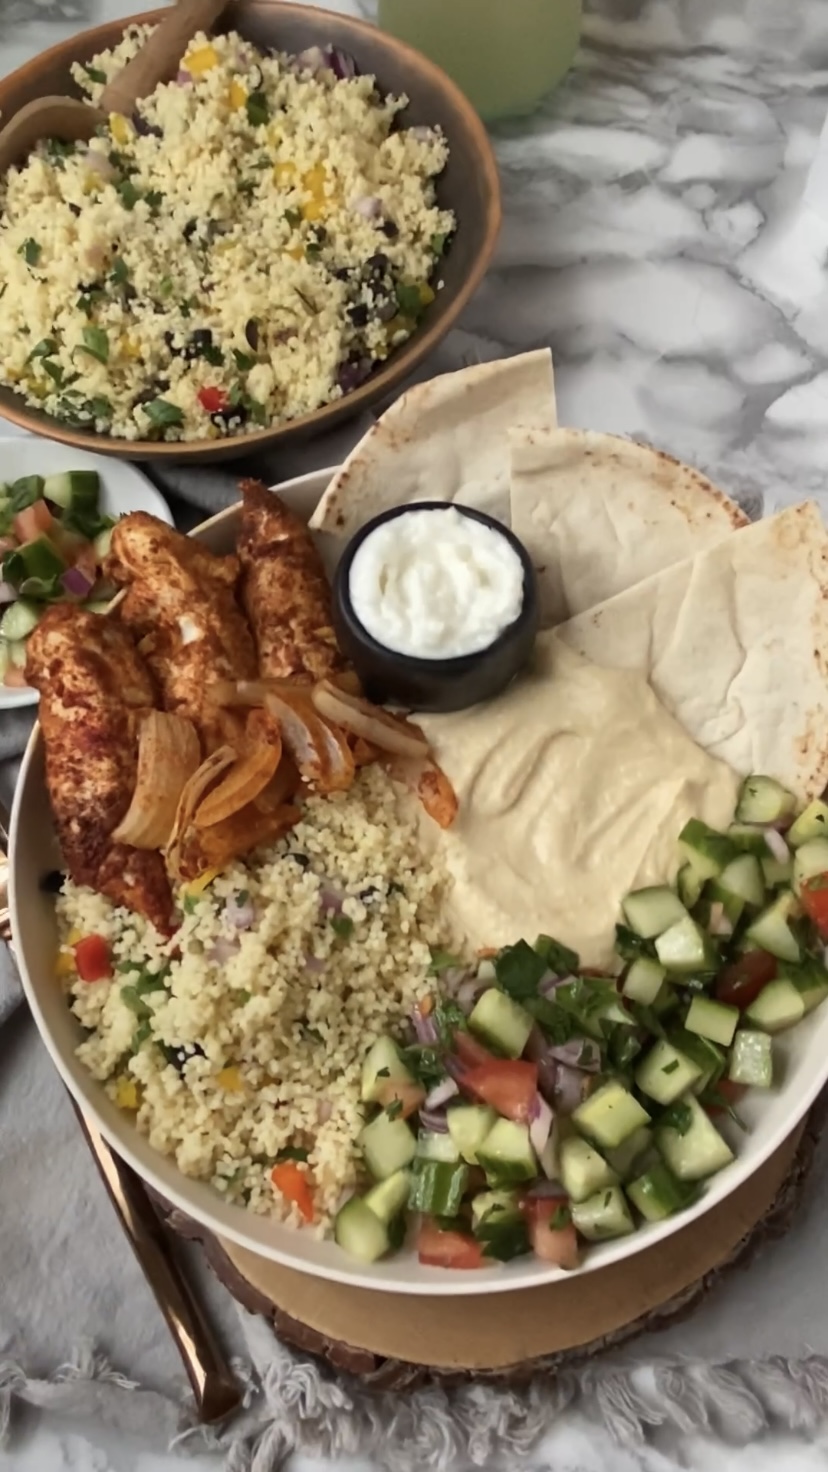 A chicken shawarma plate with chicken, pita, sauces, couscous and cucumber salad.